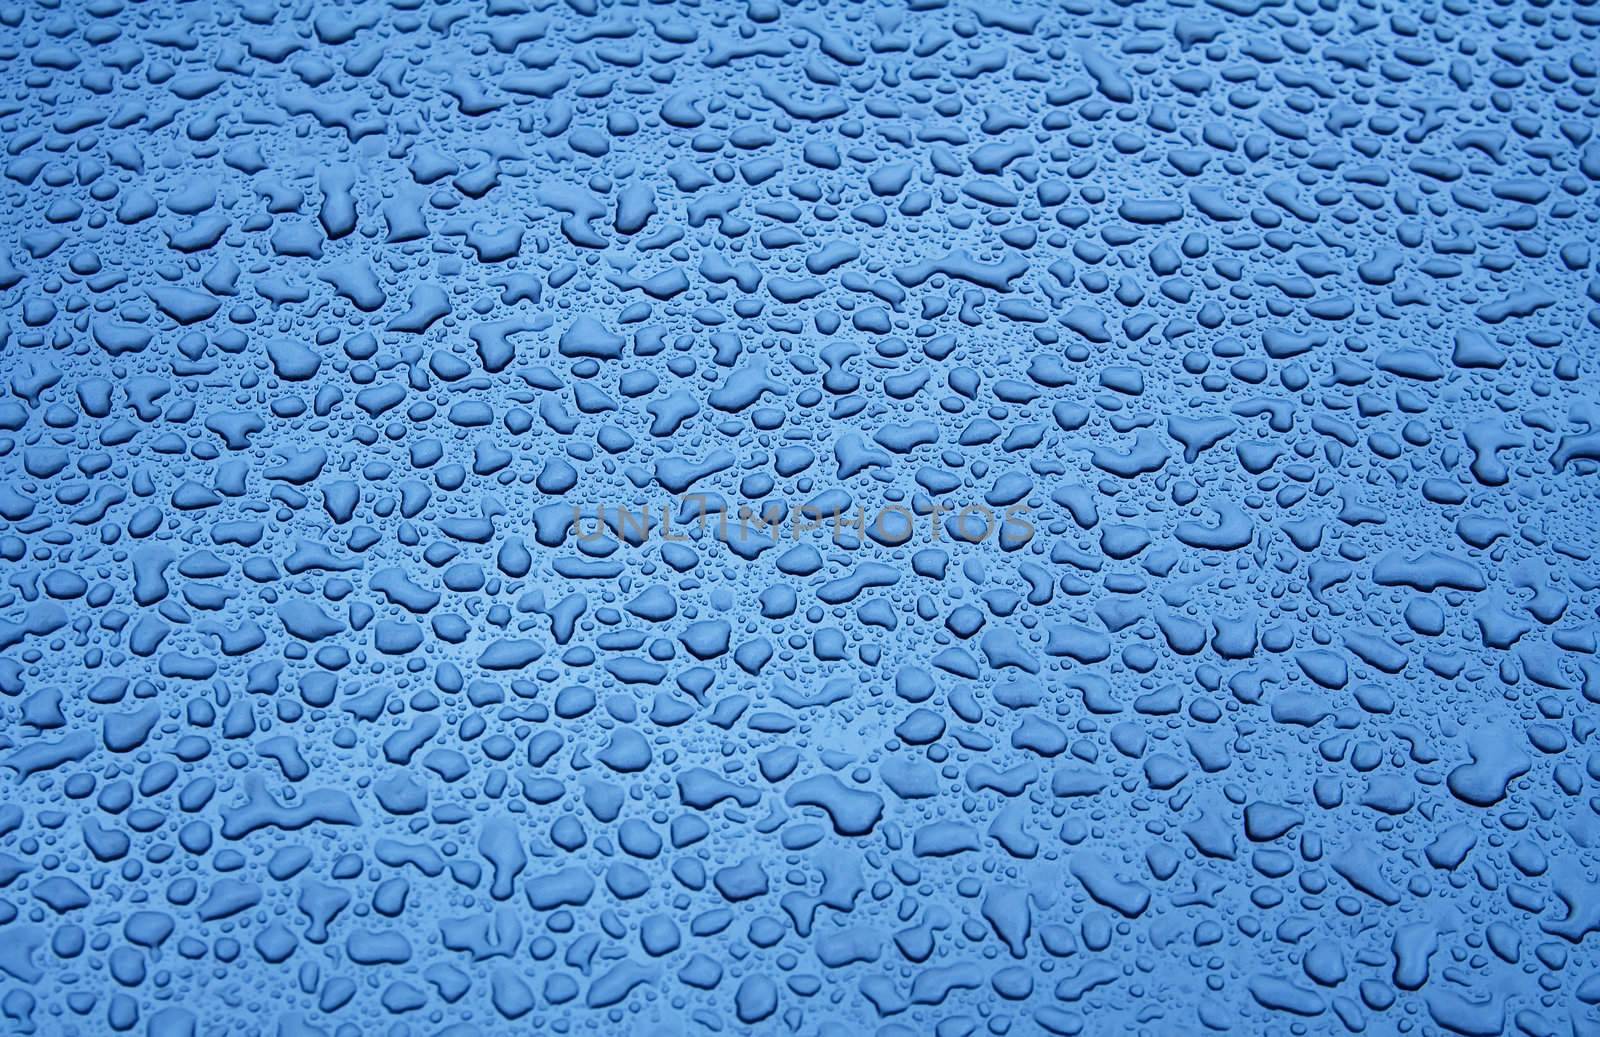 Water Droplets on a Blue Steel Surface. Close-up